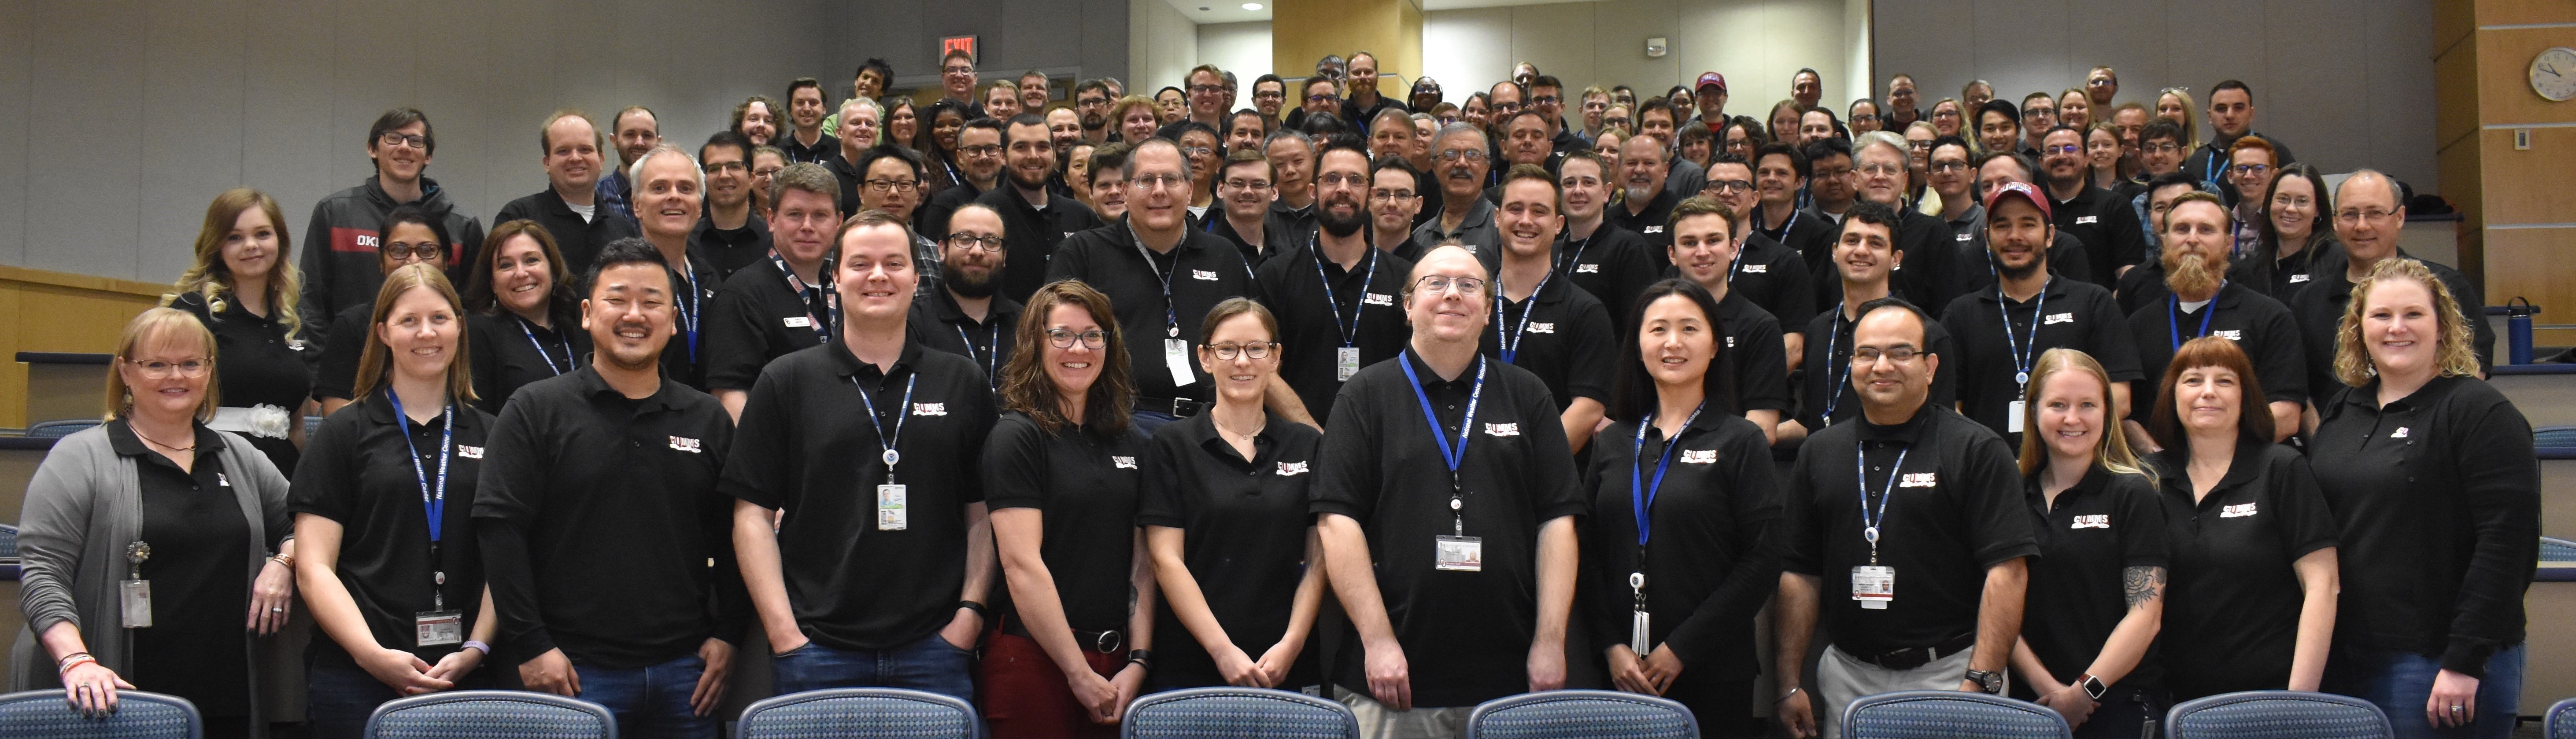 A group photo of all CIWRO (formerly CIMMS) staff taken in 2020 during an All-Hands Meeting.